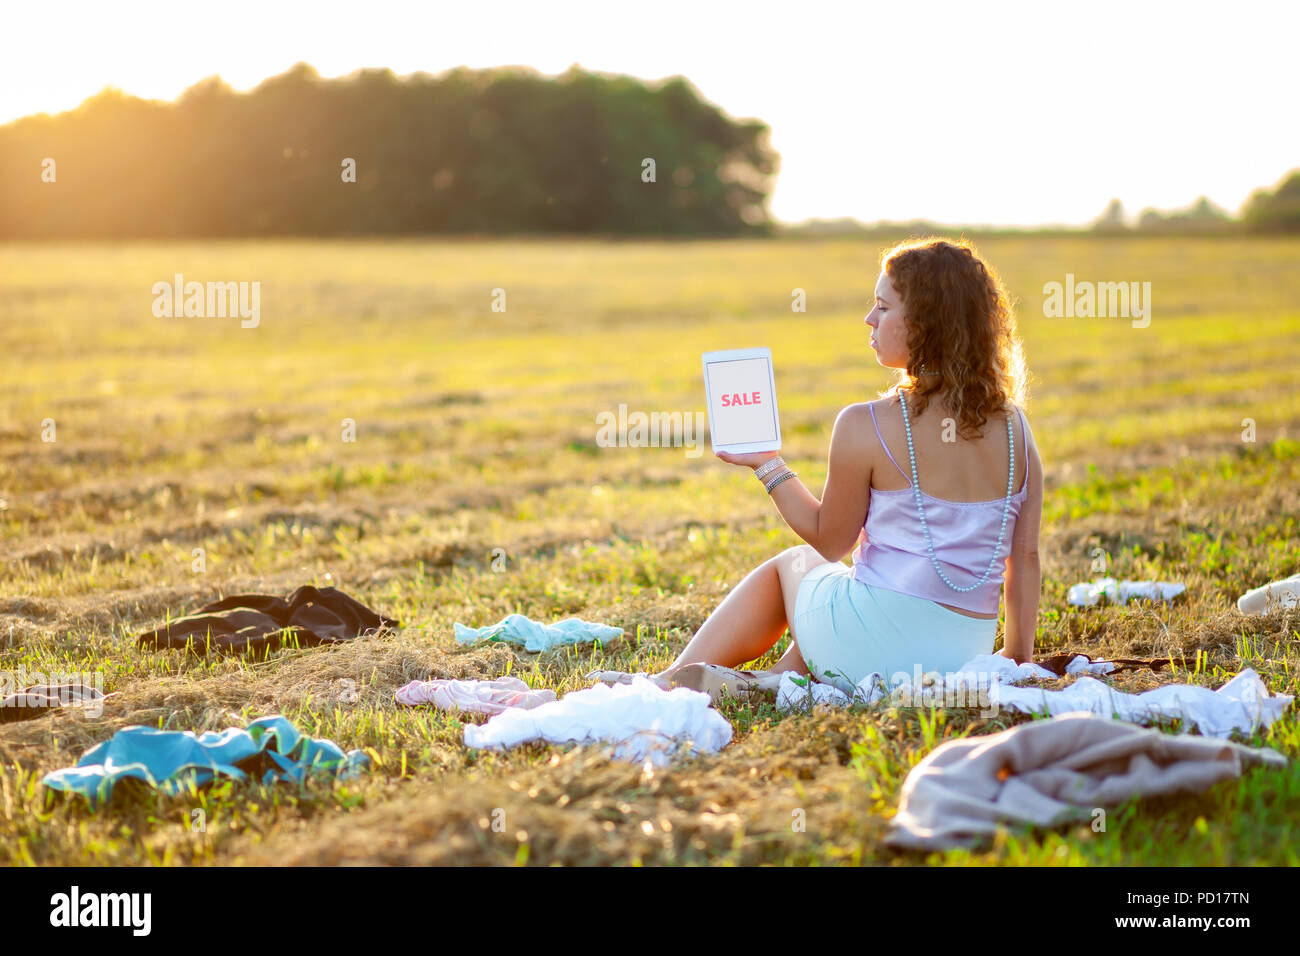 Dressy woman sitting in the middle of the field between scattered cloth and holding a tablet with SALE title during sunset. Fast fashion over-producti Stock Photo